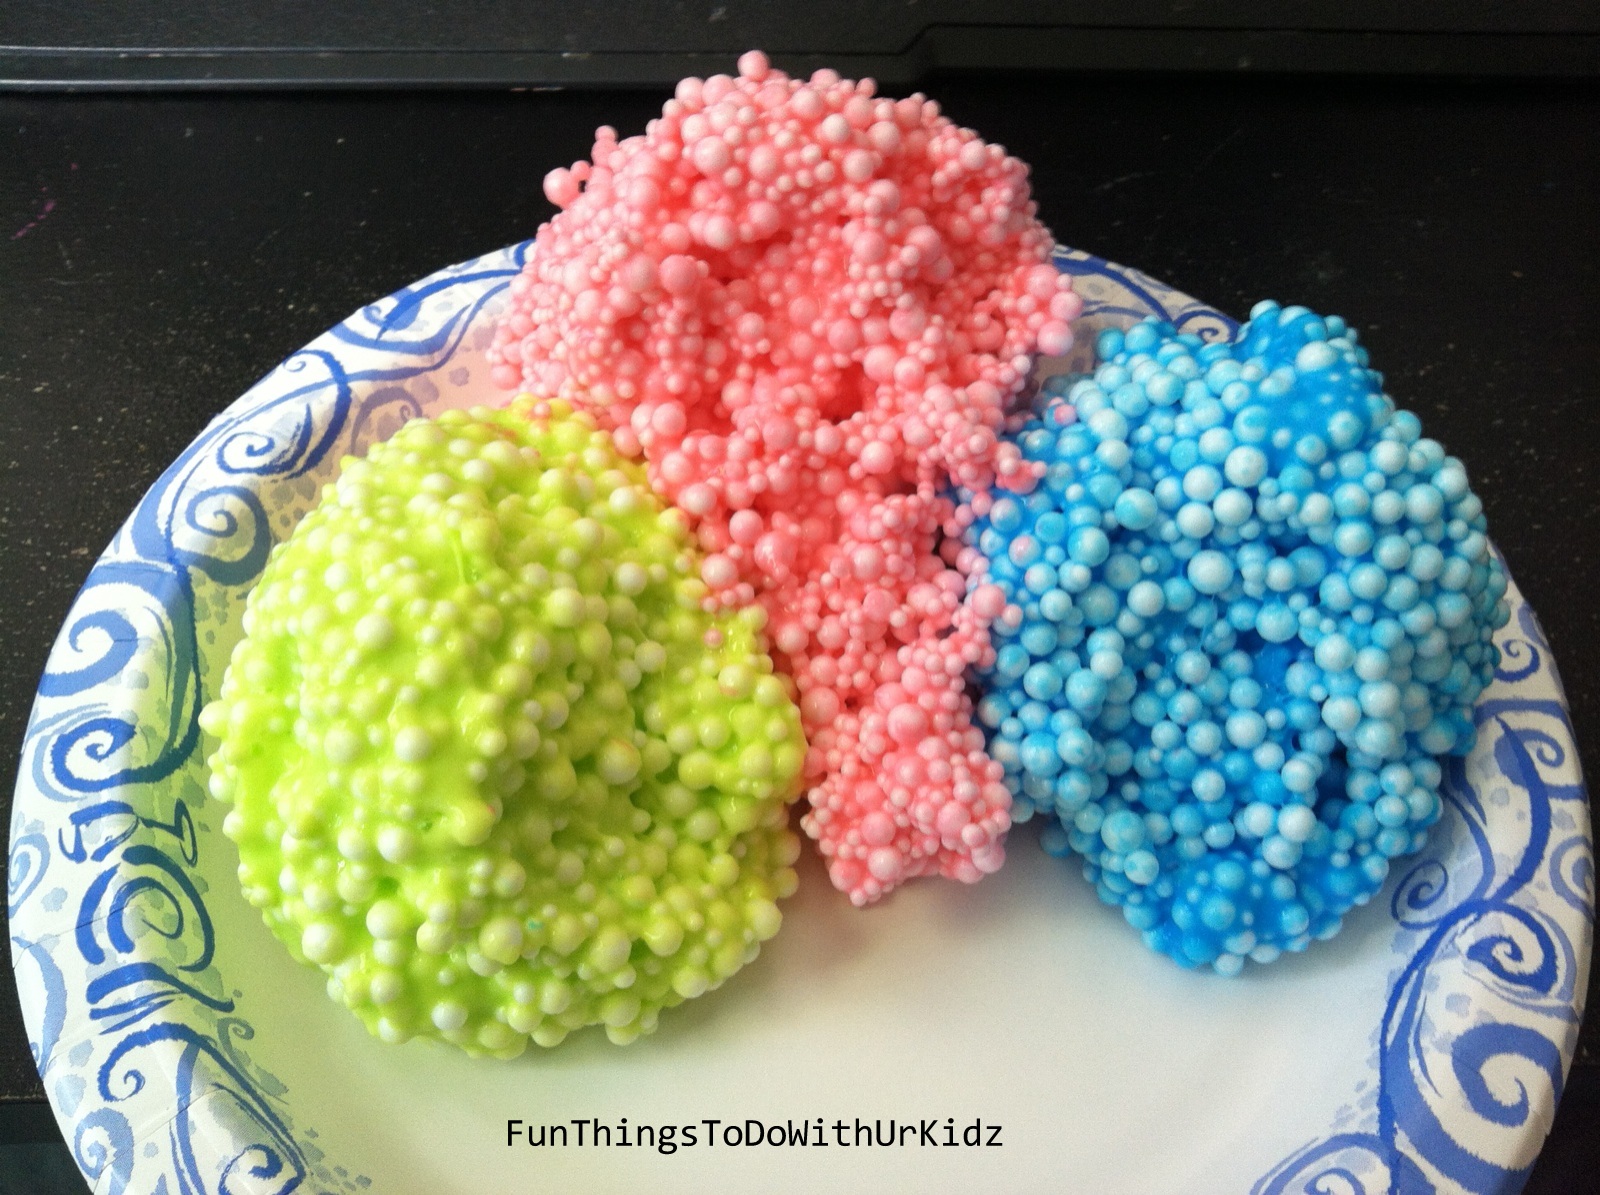 Dippin' Dots slime and foam